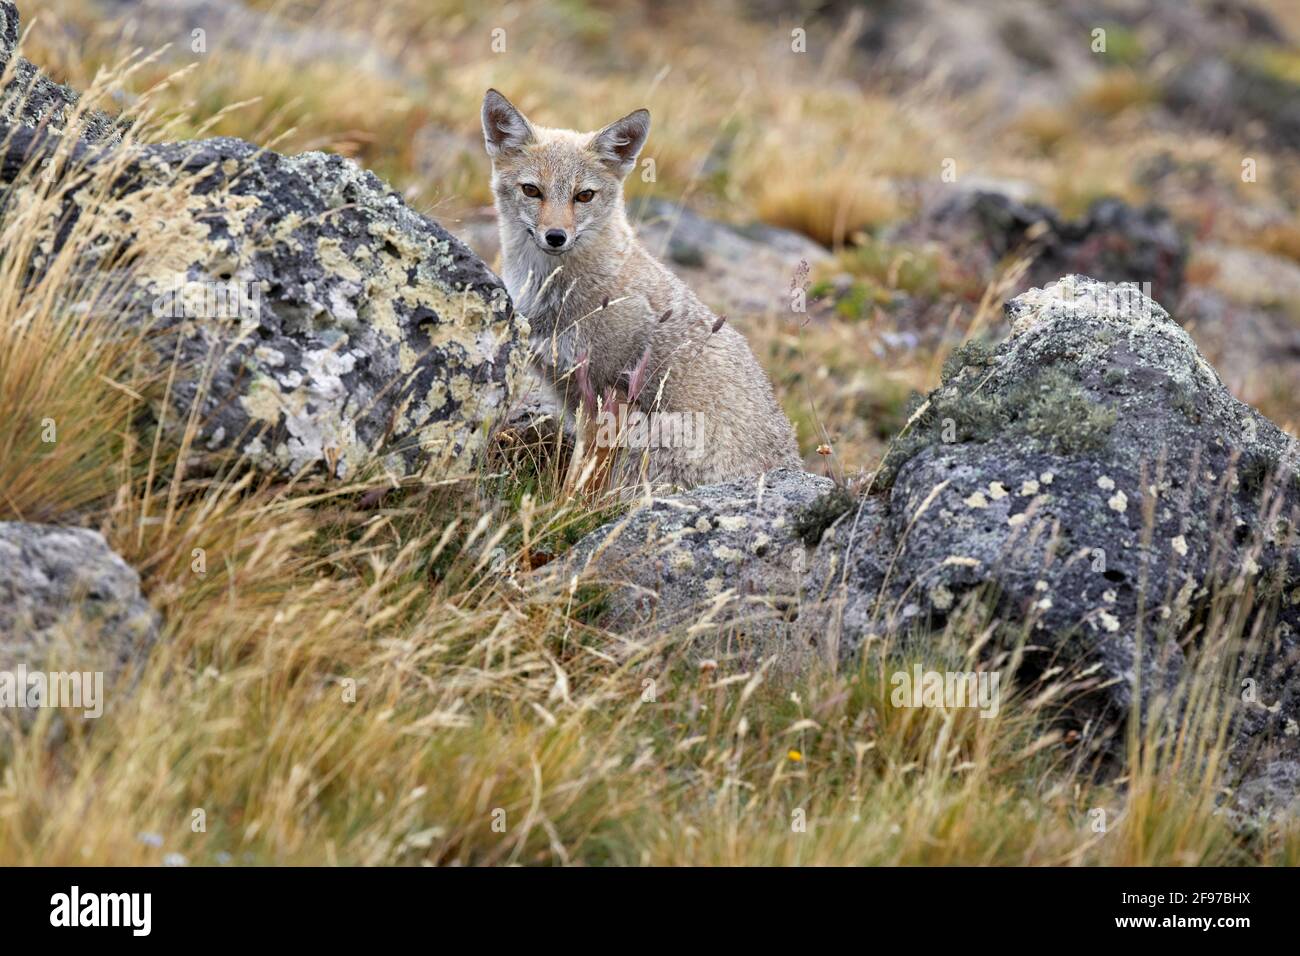 Lycalopex Griseus Patagonian Fox South American gray fox Chilla Gray Zorro in Pali Aike National Park Chile Stock Photo